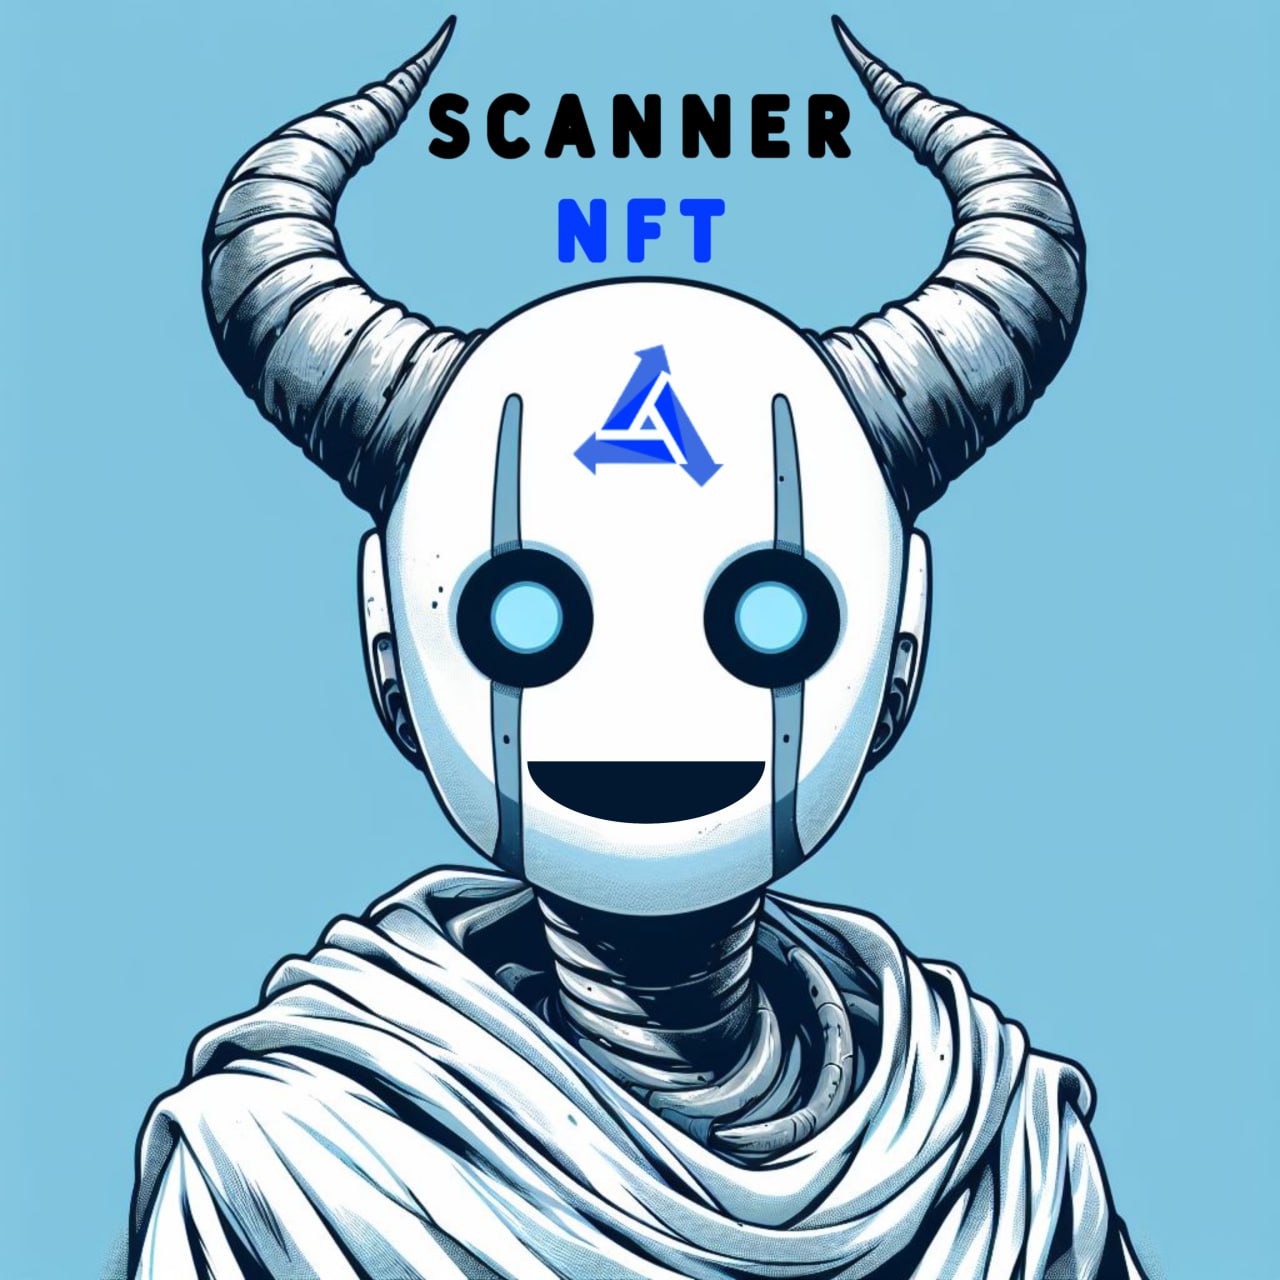 New product - NFT Scanner!